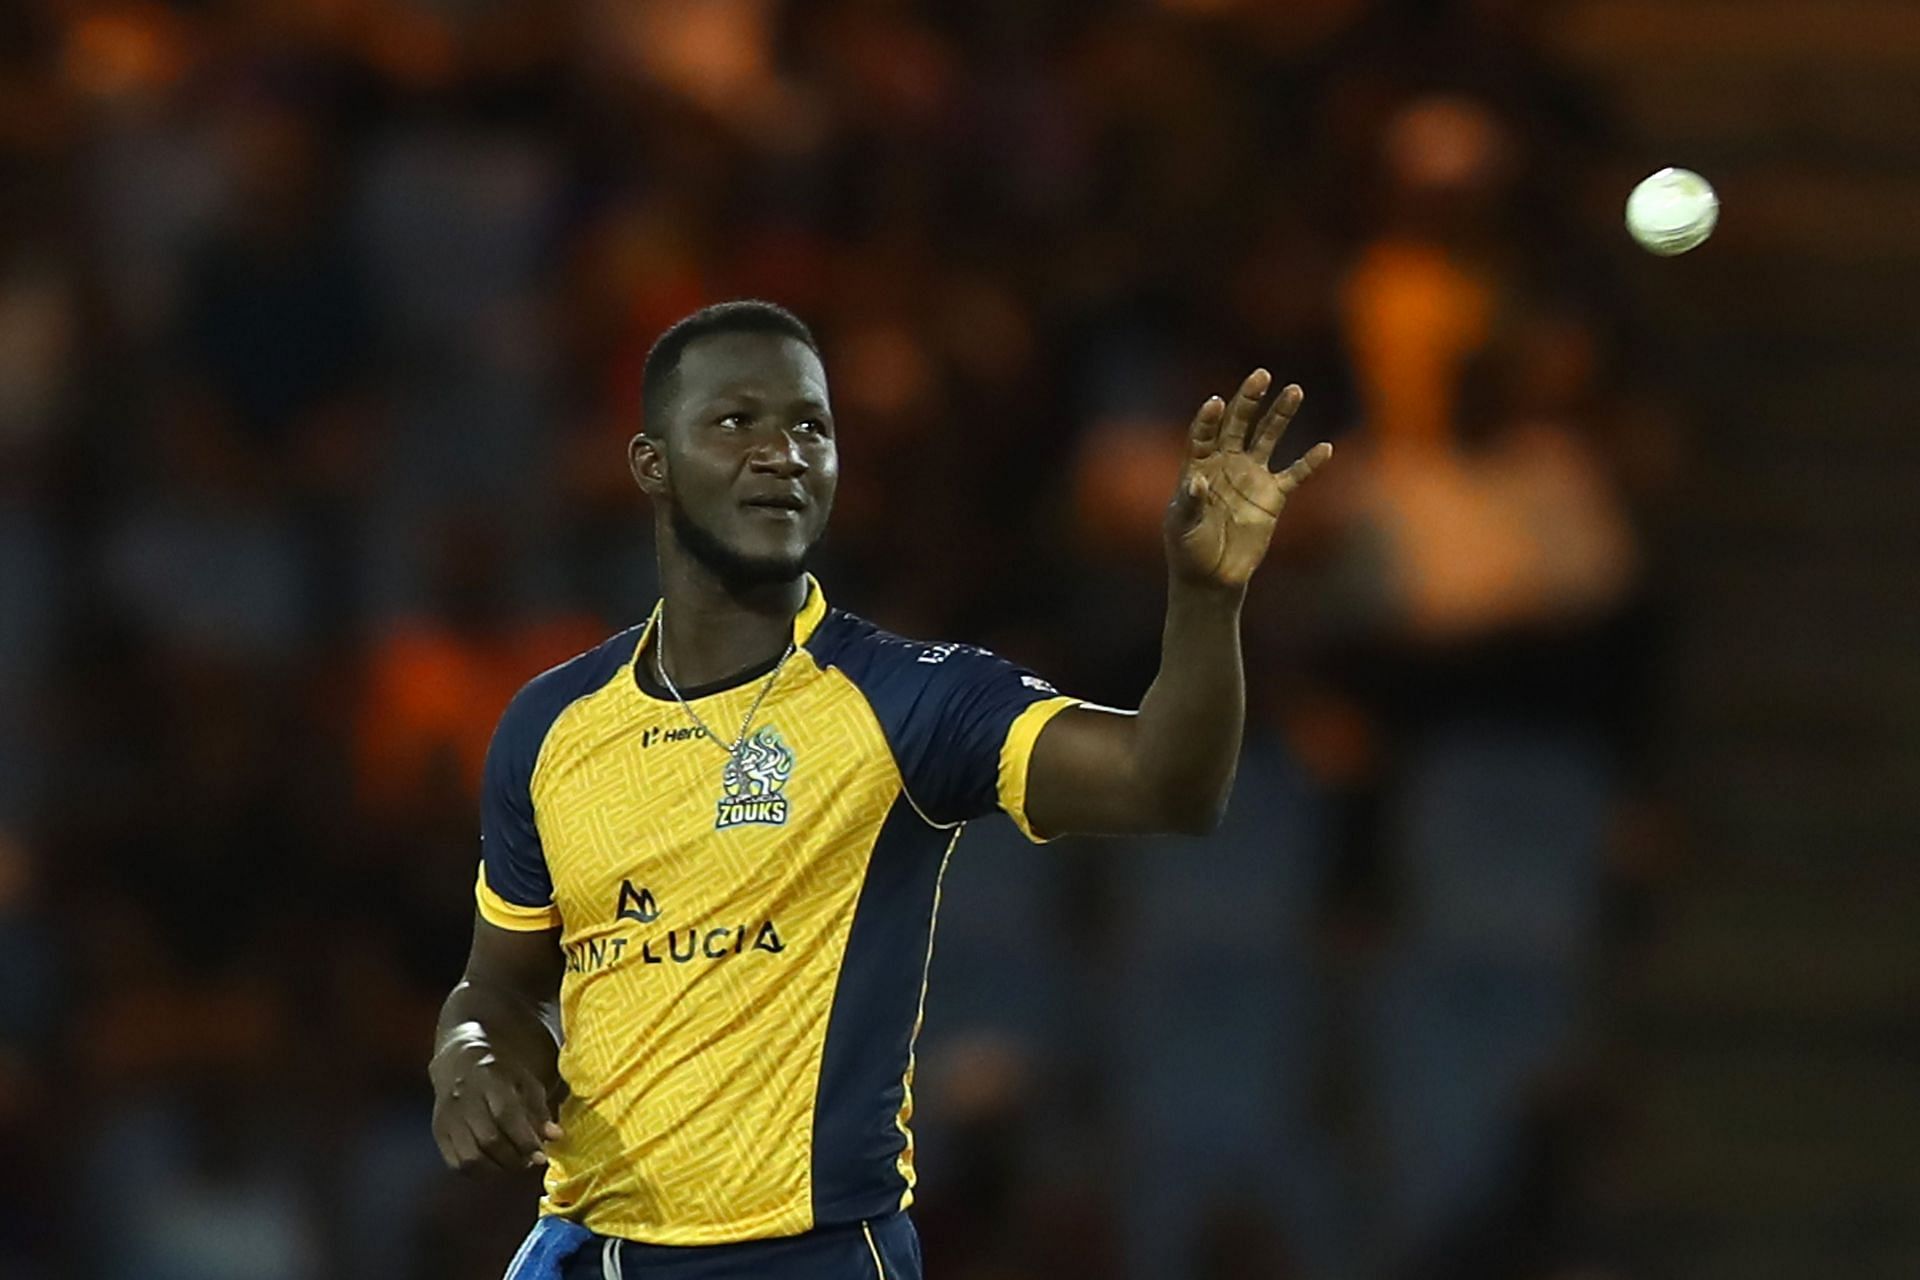 Daren Sammy is one of the biggest names in this game